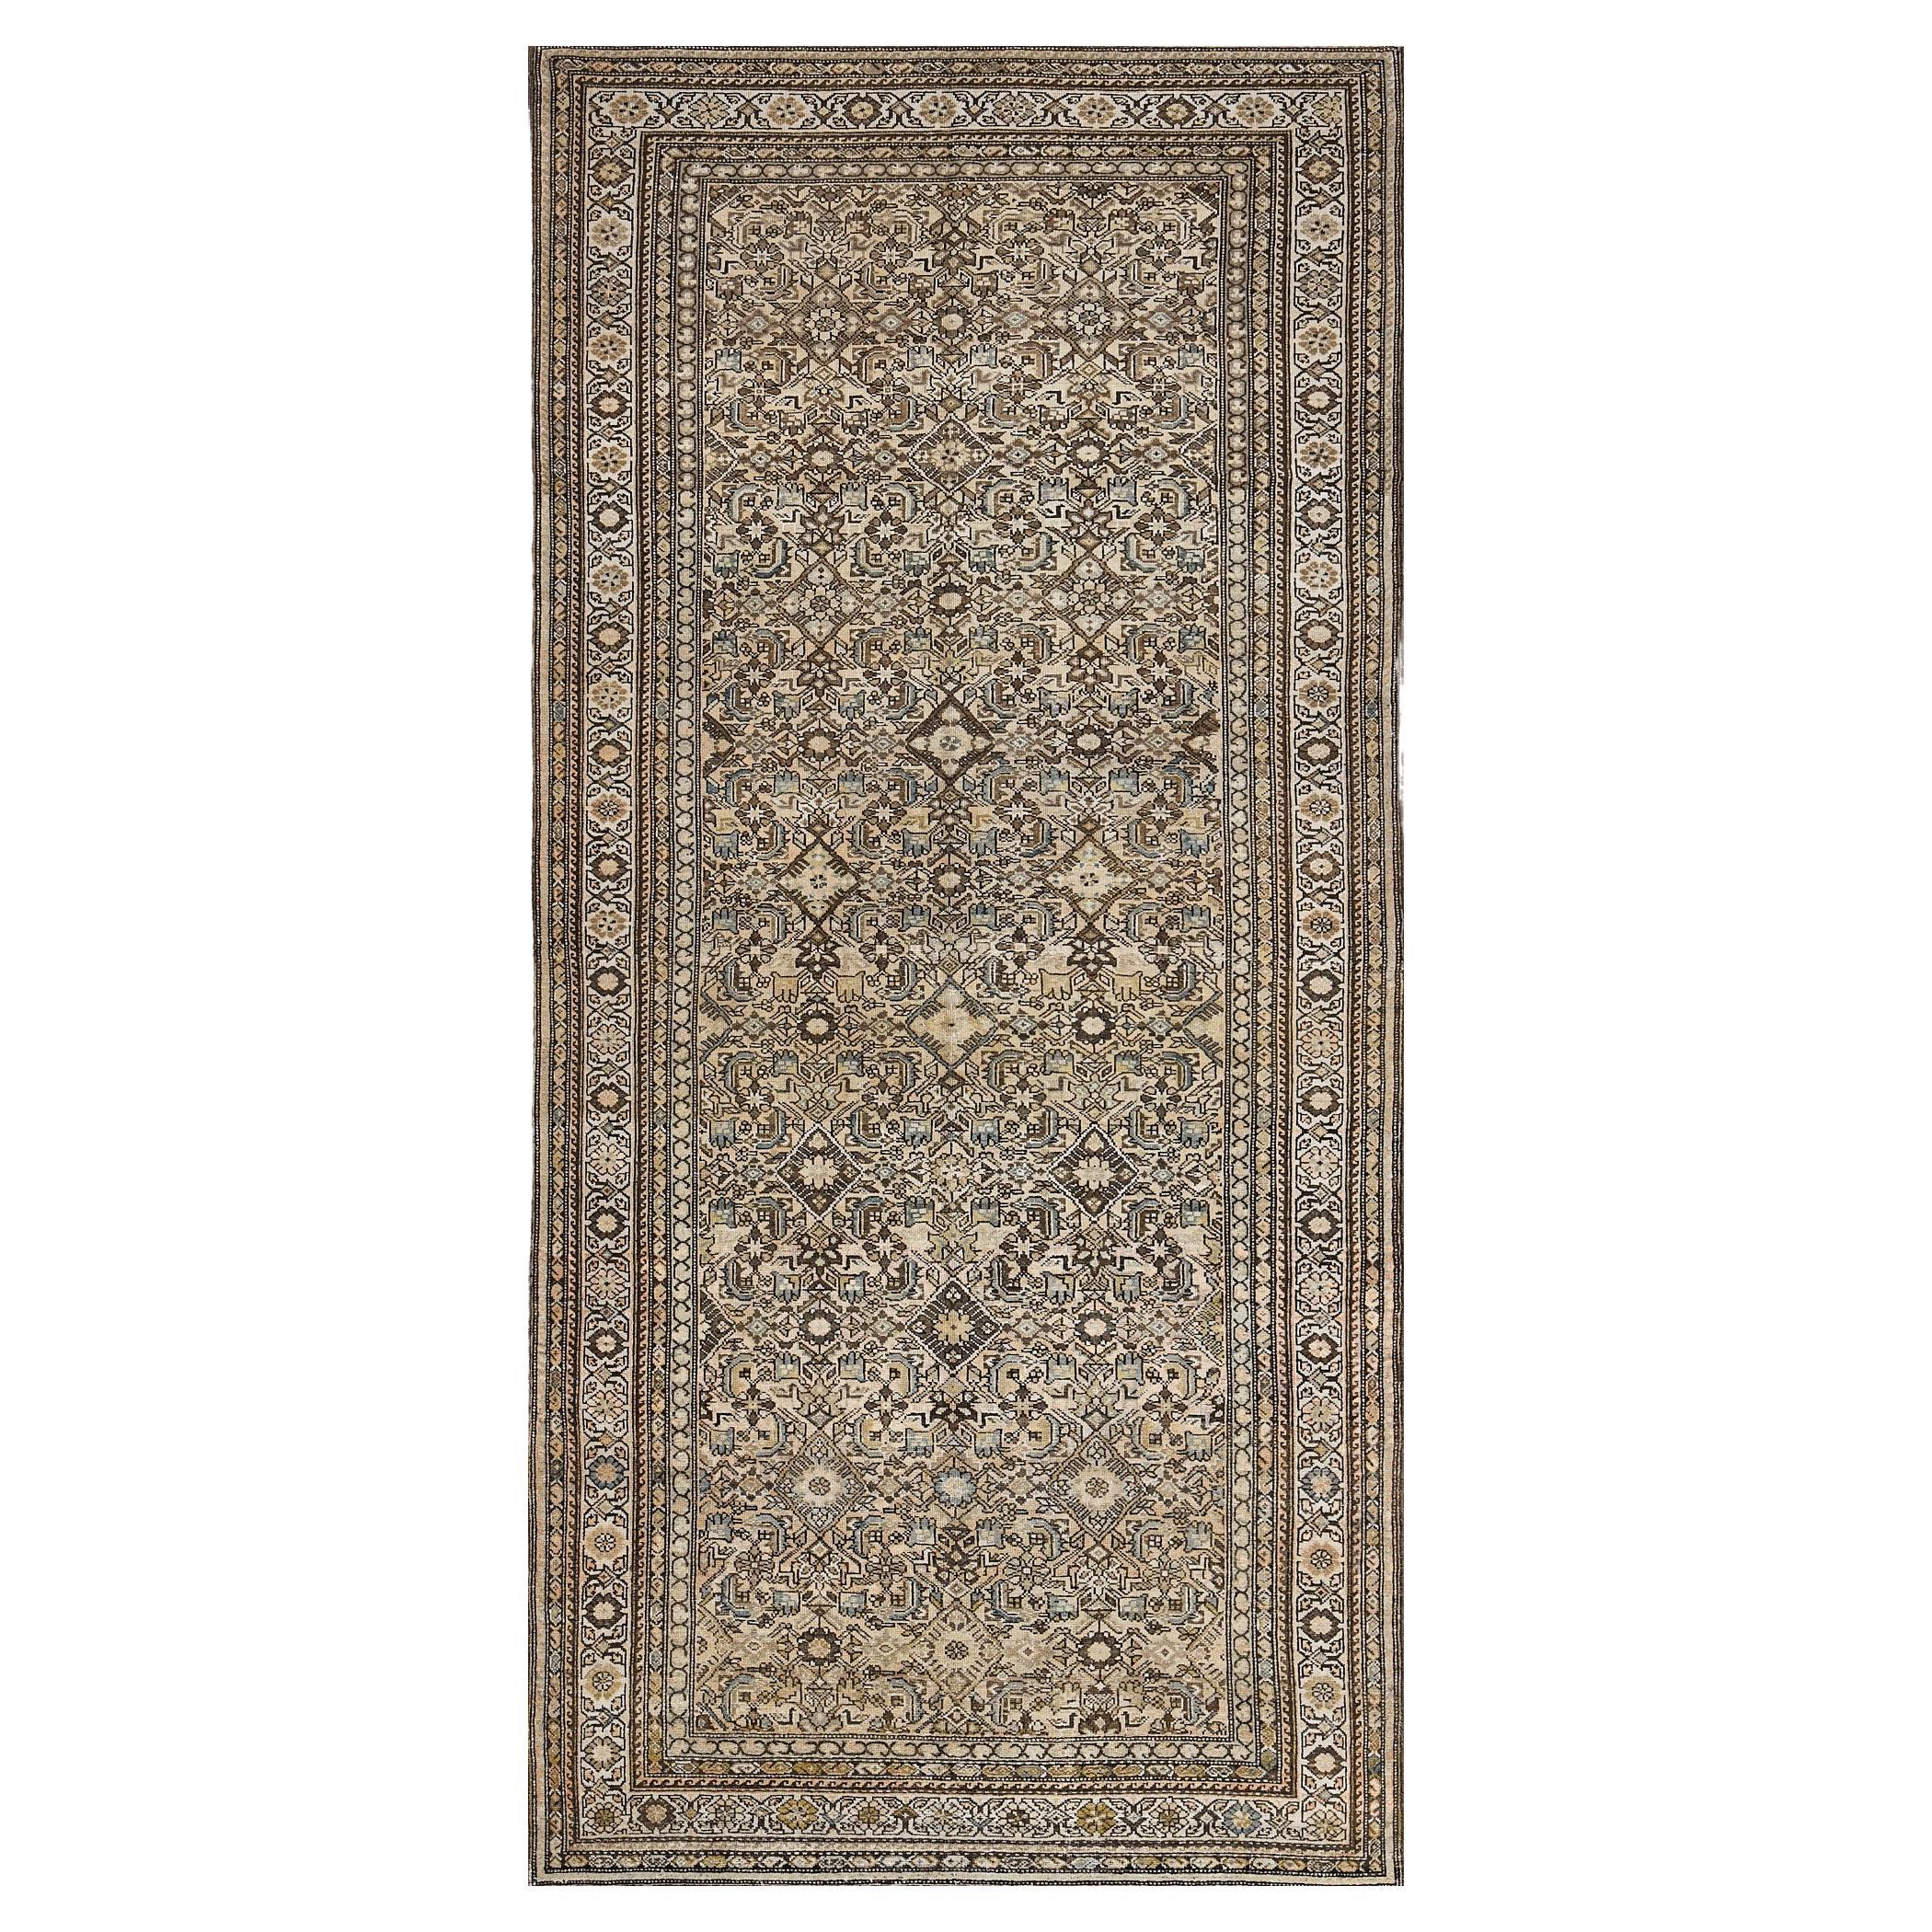 Antique Late 19th Century Handwoven Persian Malayer Rug